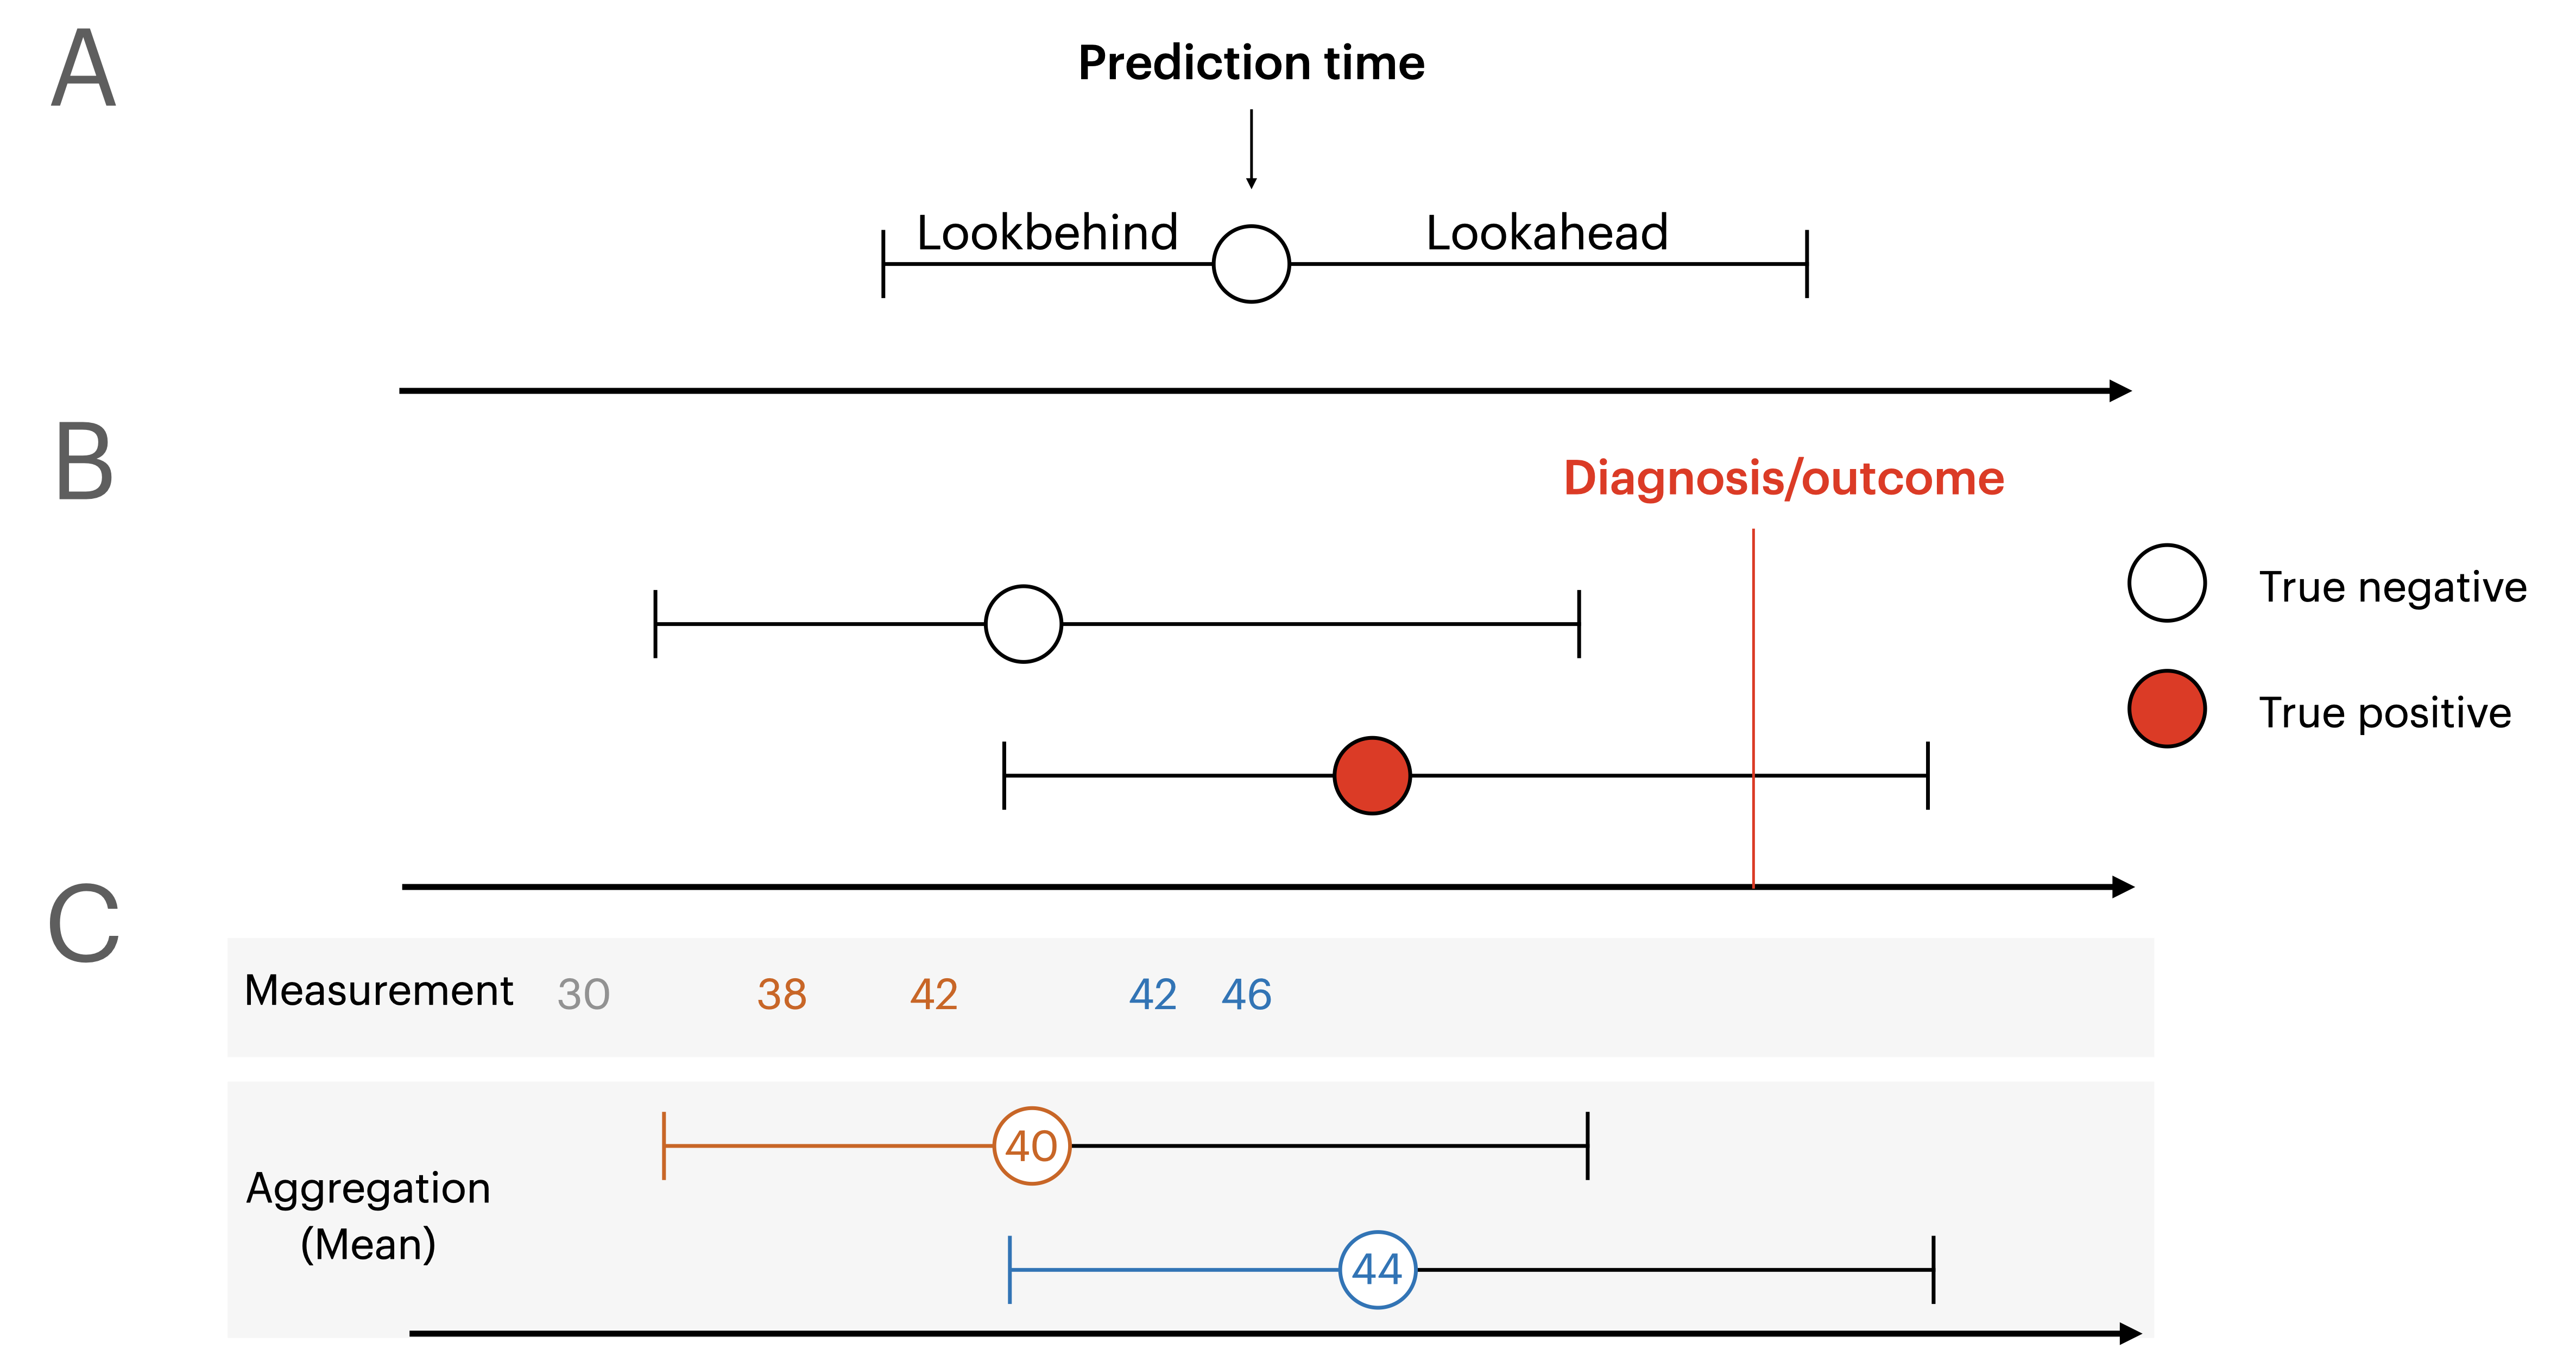 Terminology: A: Lookbehind determines how far back in time to look for values for predictors, whereas lookahead determines how far into the future to look for outcome values. A prediction time indicates at which point the model issues a prediction, and is used as a reference for the lookbehind and lookahead. B: Labels for prediction times are true negatives if the outcome never occurs, or if the outcome happens outside the lookahead window. Labels are only true positives if the outcome occurs inside the lookahead window. C) Values within the lookbehind window are aggregated using a specified function, for example the mean as shown in this example, or max/min etc. D) Prediction times are dropped if the lookbehind extends further back in time than the start of the dataset or if the lookahead extends further than the end of the dataset. This behaviour is optional